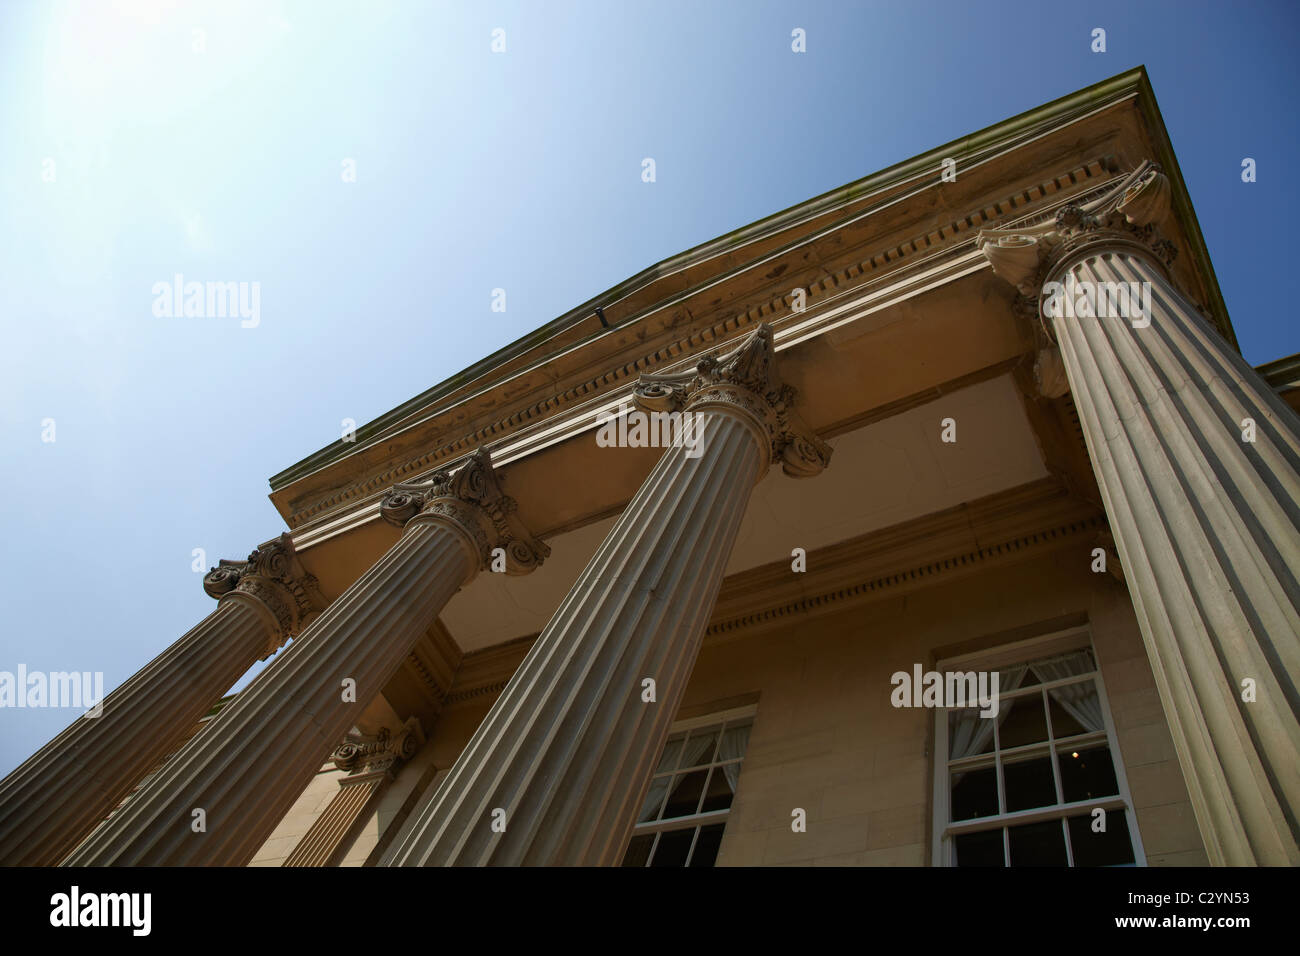 Looking up at building with 4 Grecian Columns windows and blue sky with sun Stock Photo